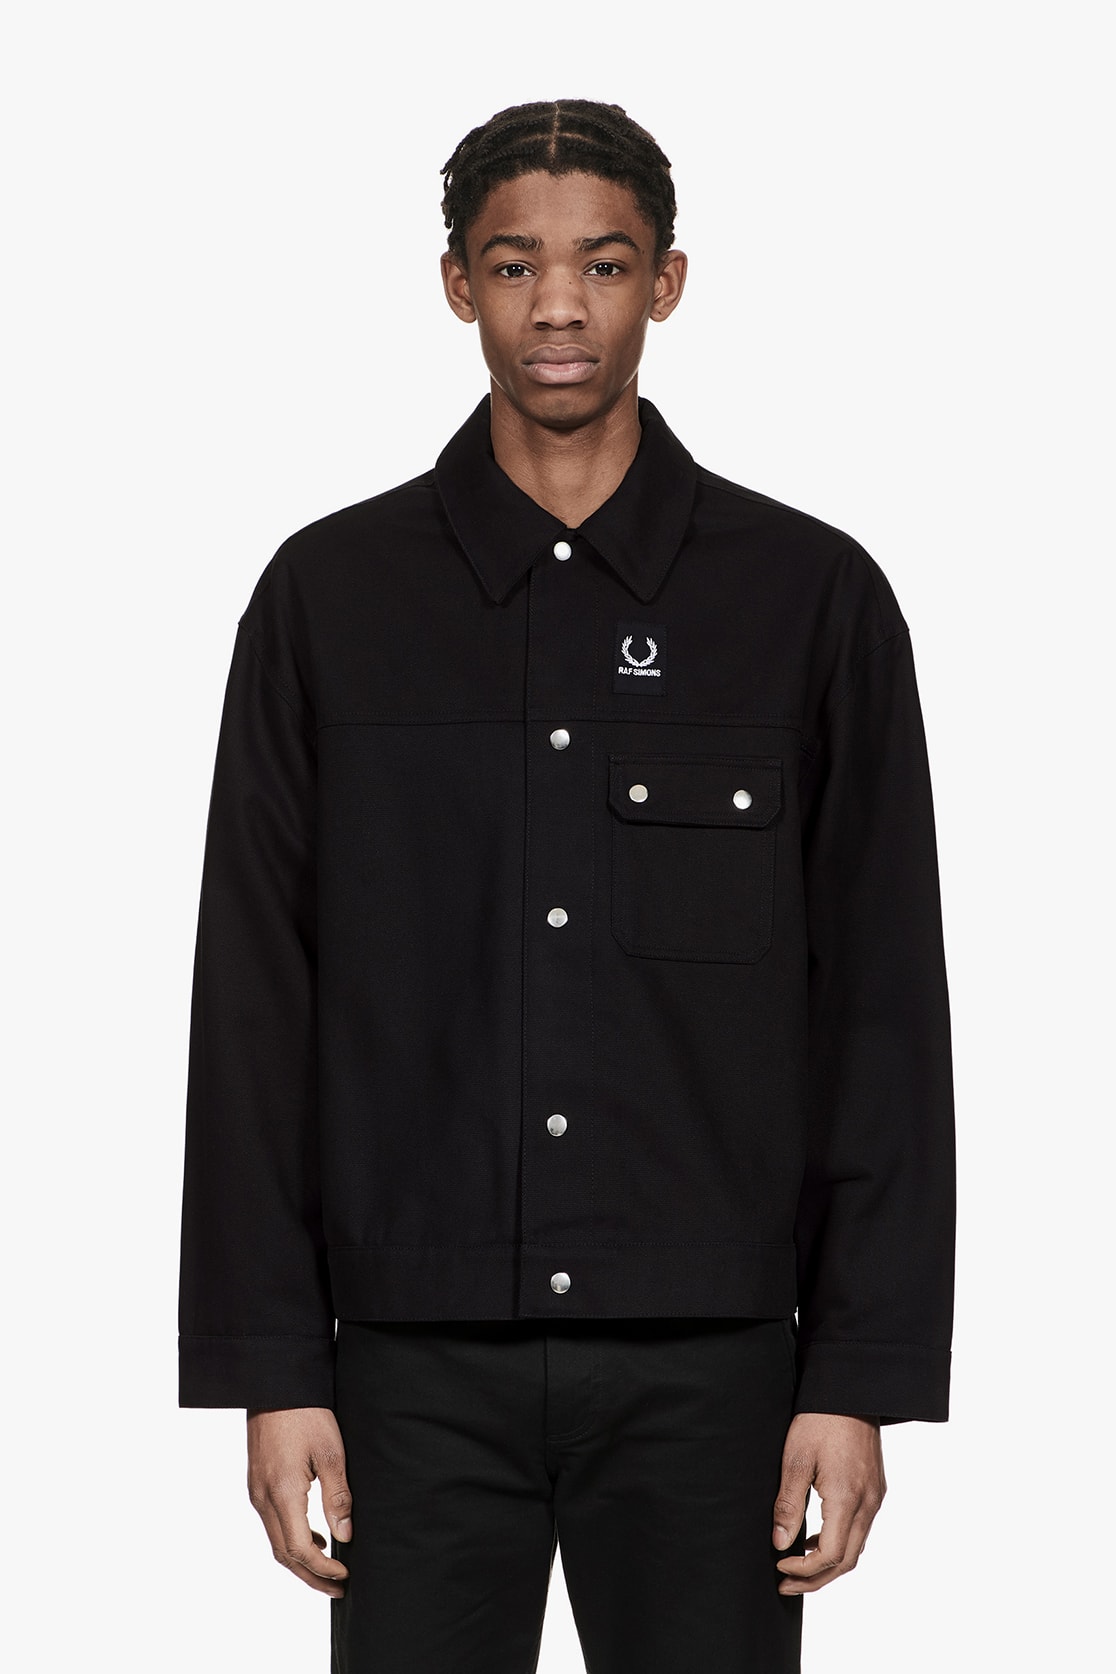 Fred Perry x Raf Simons Autumn 2018 Collection Fashion Clothing Cop Purchase Buy Collab Collaborations 10 years ten decade